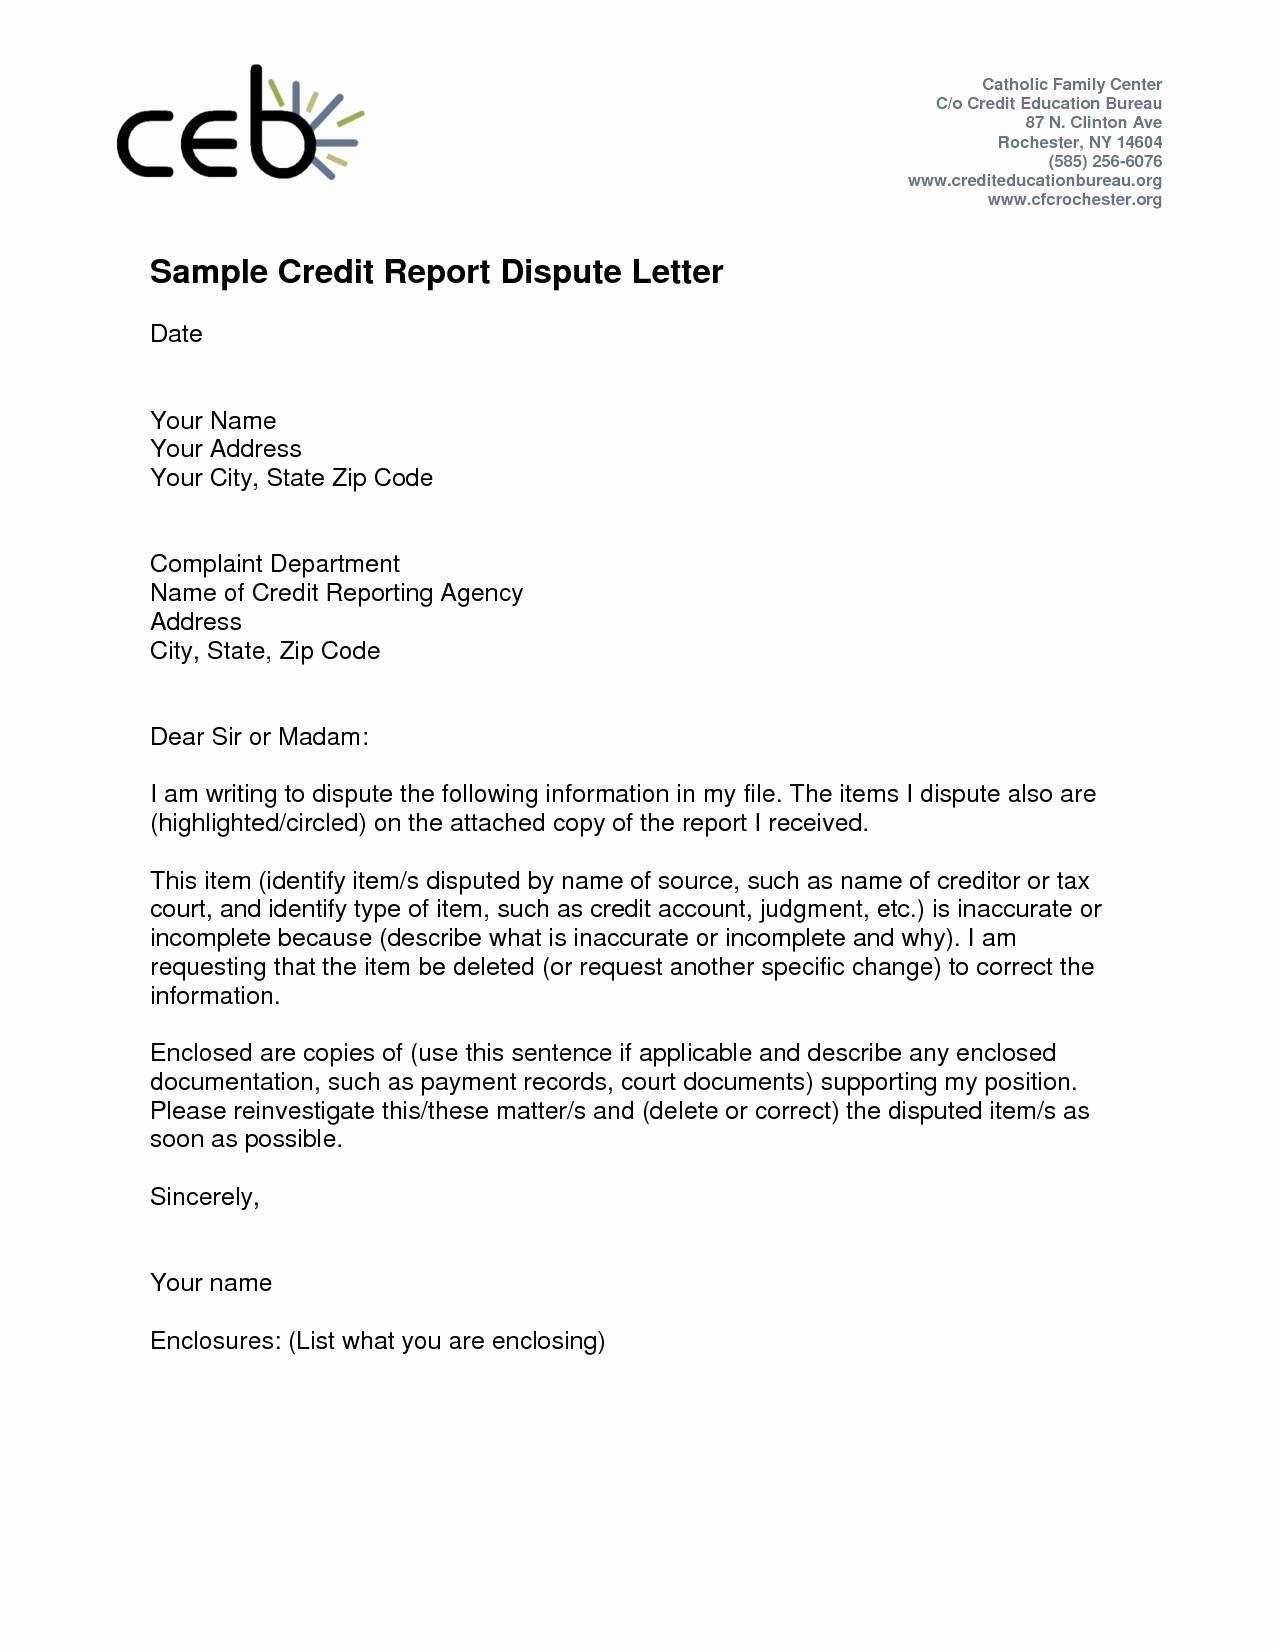 Letters To Dispute Credit - Calep.midnightpig.co In Credit Report Dispute Letter Template